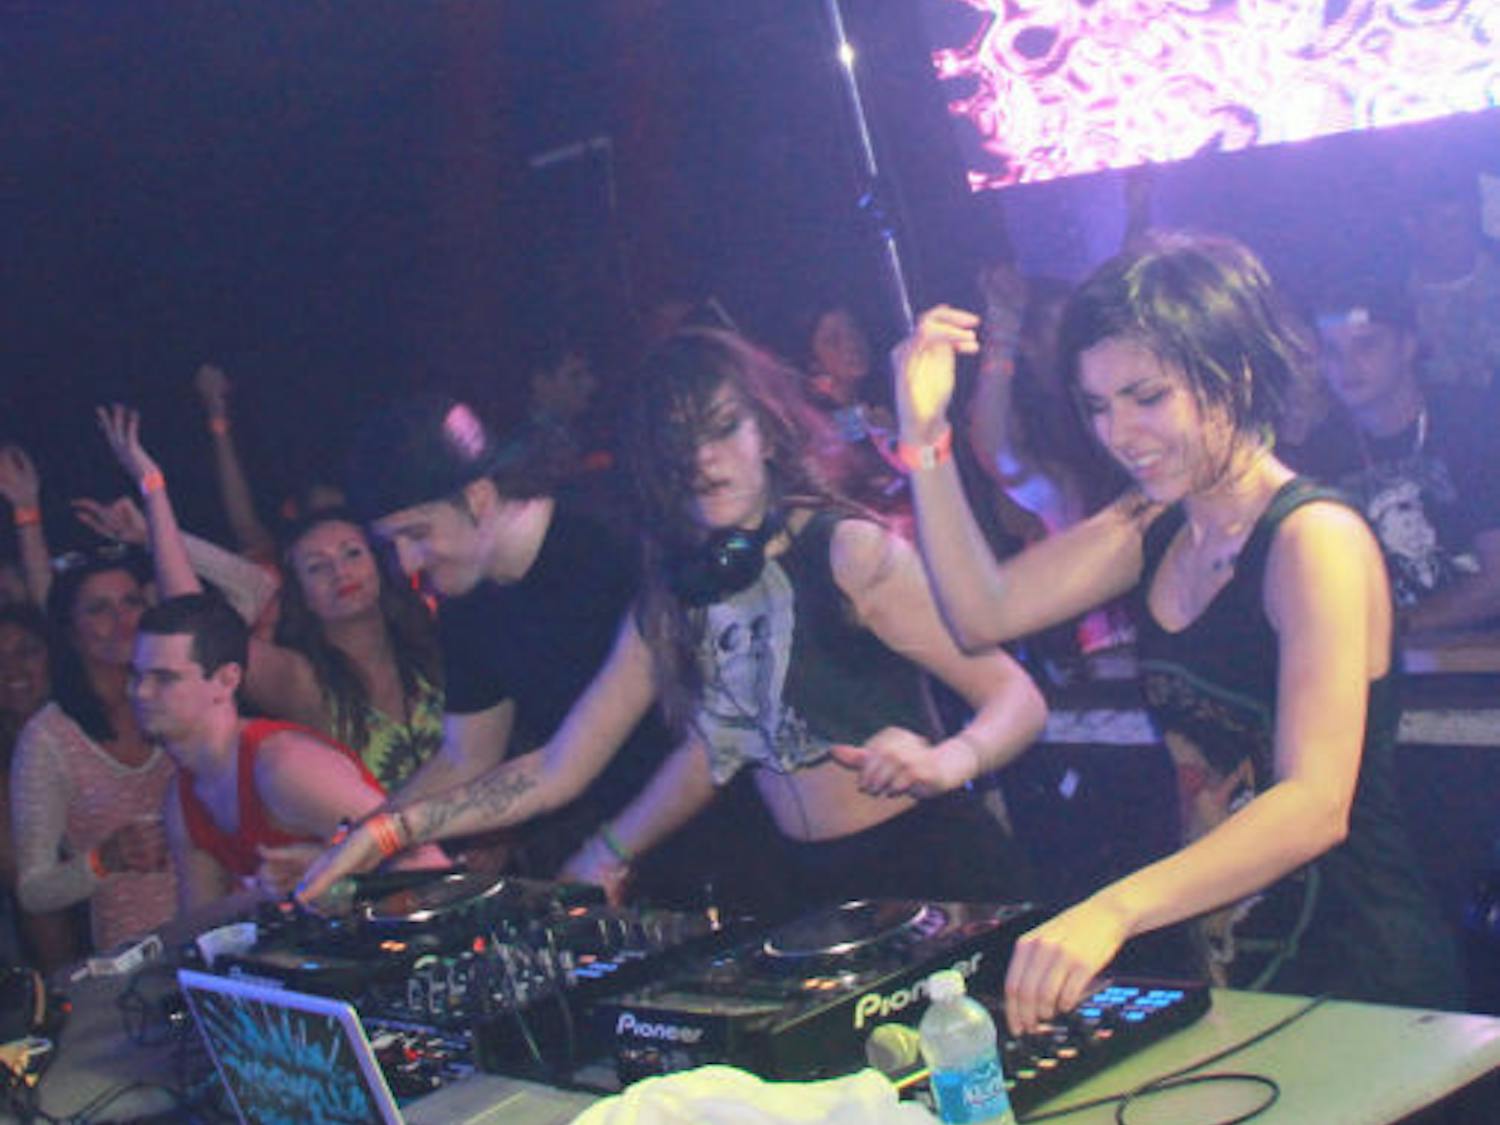 Electronic dance music group Krewella performs at Forum, 233 W. University Ave., Friday. The performance, which drew a crowd of about 1,100 people, was part of its Play Hard Tour.